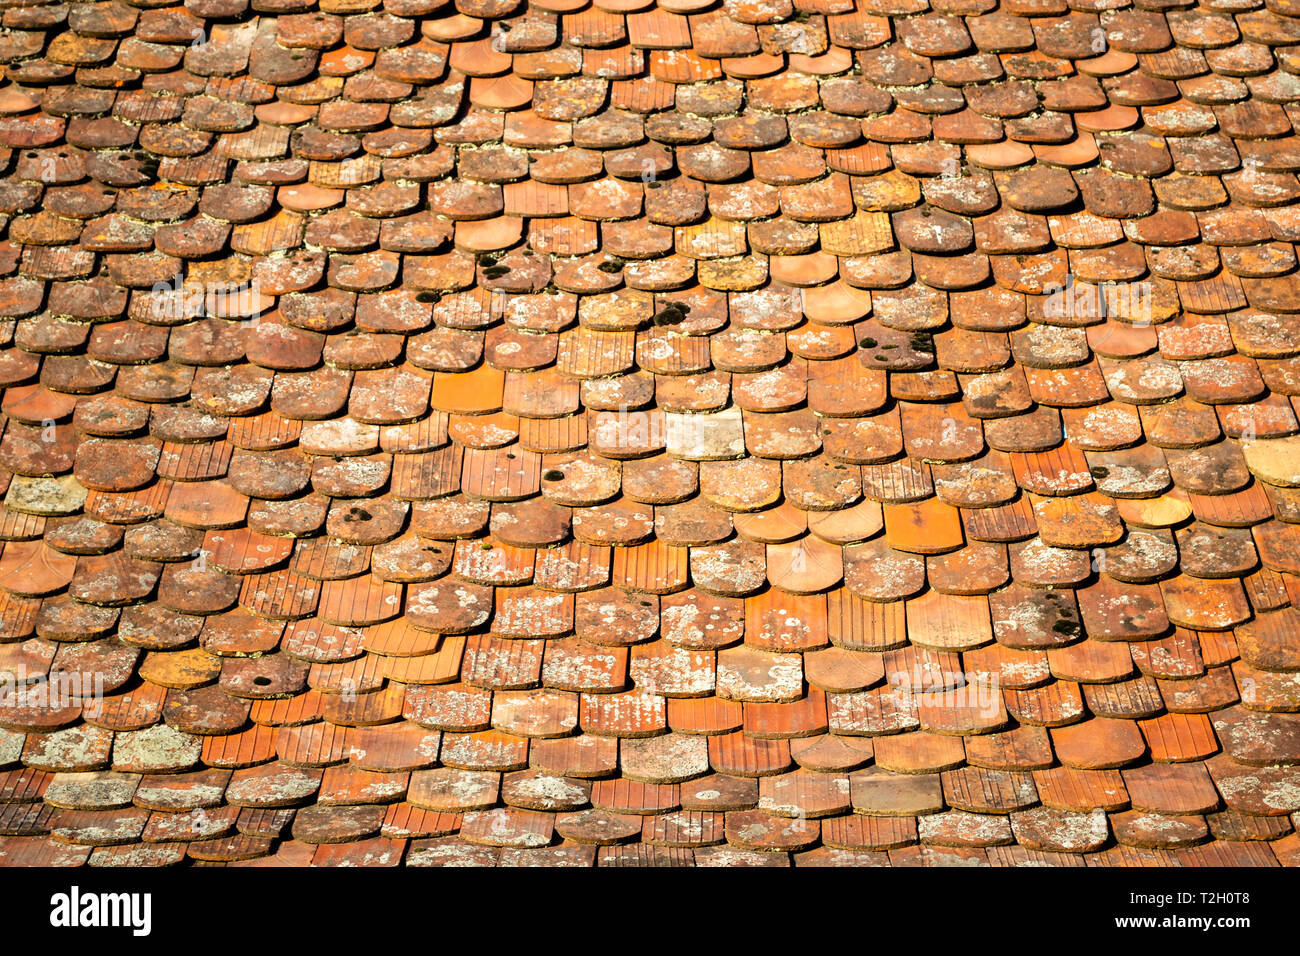 Abstract pattern of old, traditional, brown/orange, ceramic, overlapping shingles (tiles, schindle/schindel in German) on a house roof, lit in the mor Stock Photo